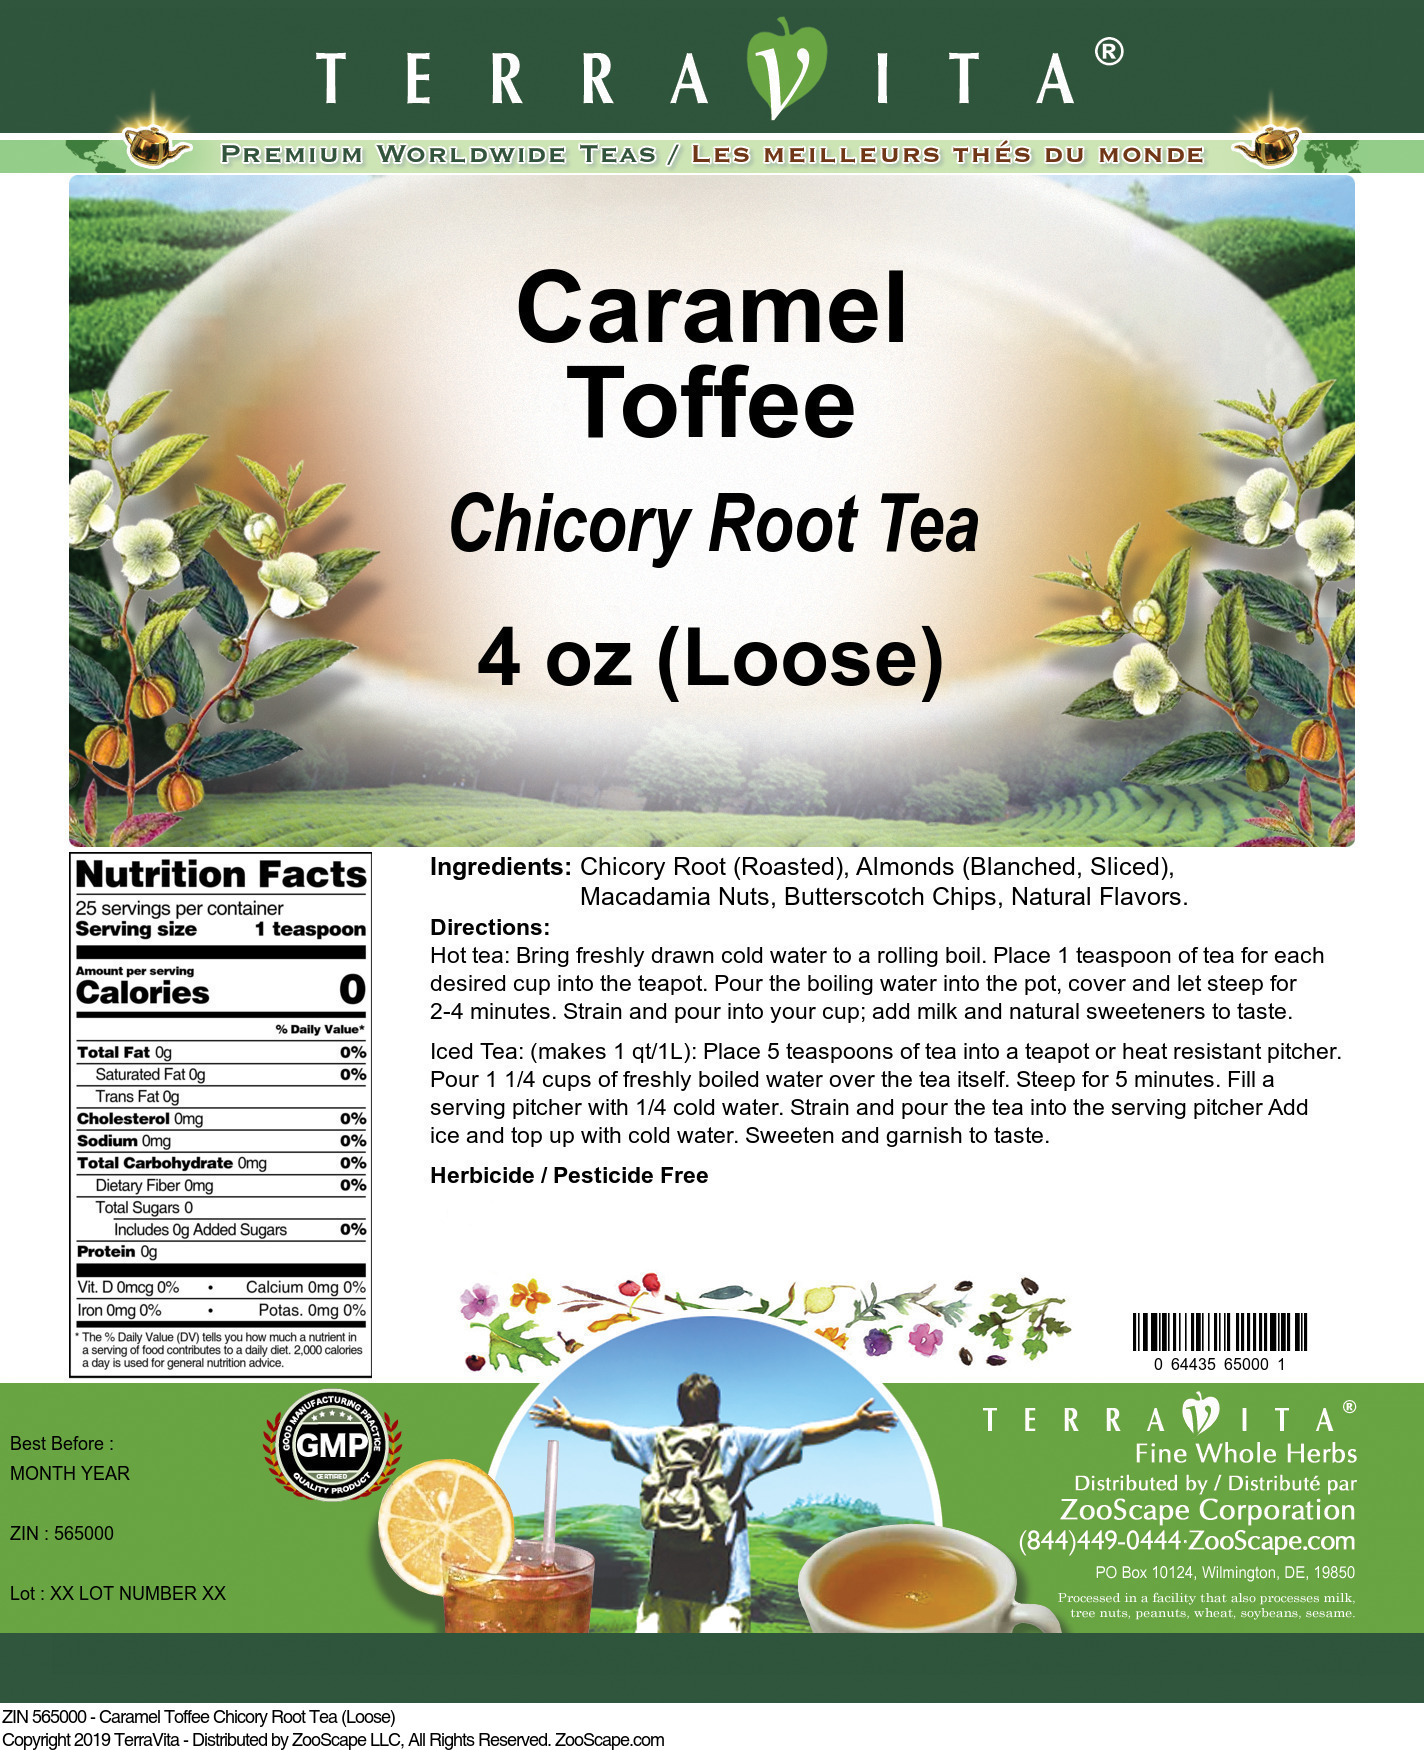 Caramel Toffee Chicory Root Tea (Loose) - Label